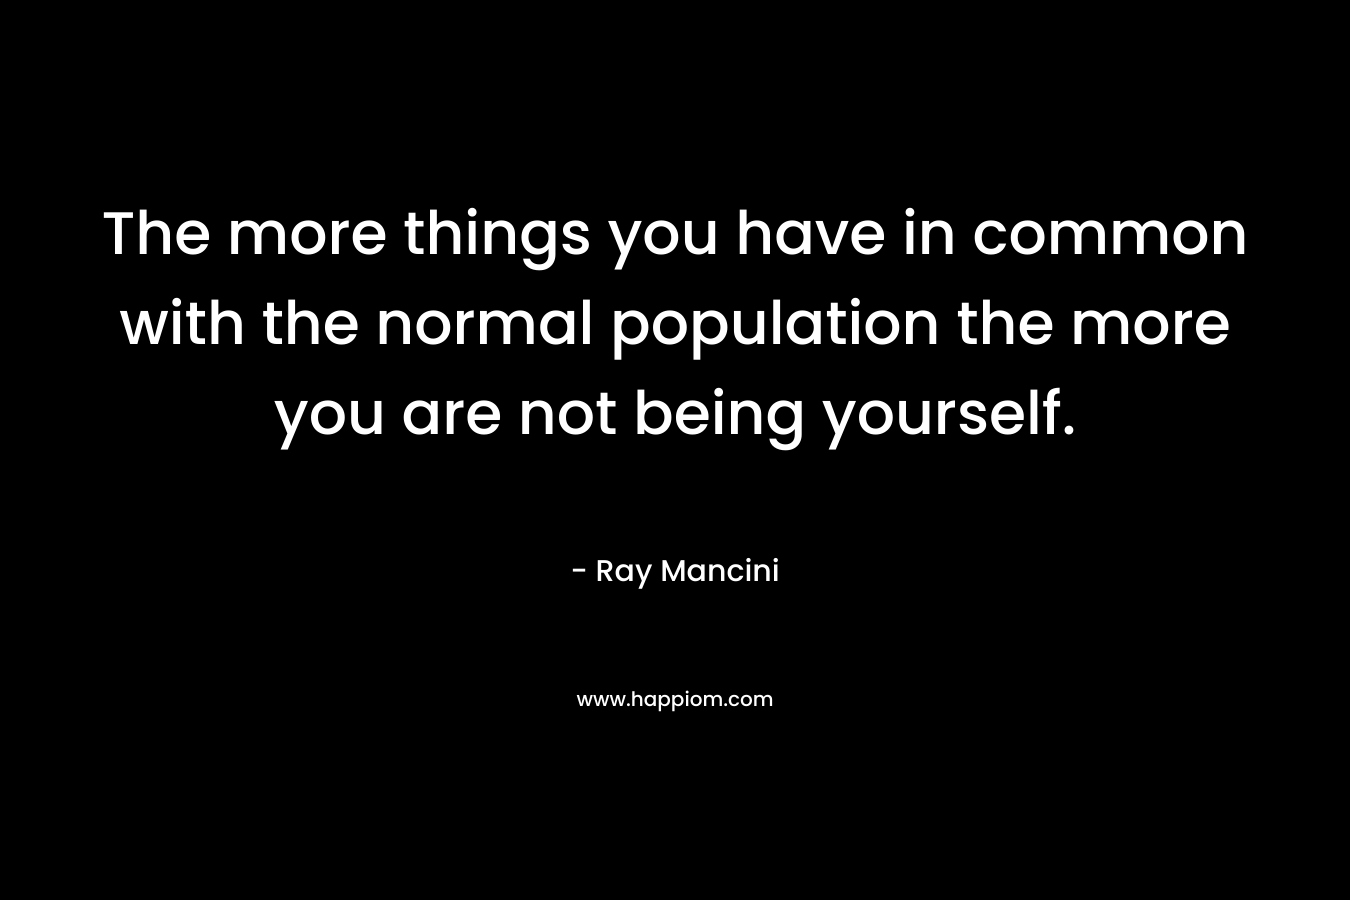 The more things you have in common with the normal population the more you are not being yourself. – Ray Mancini